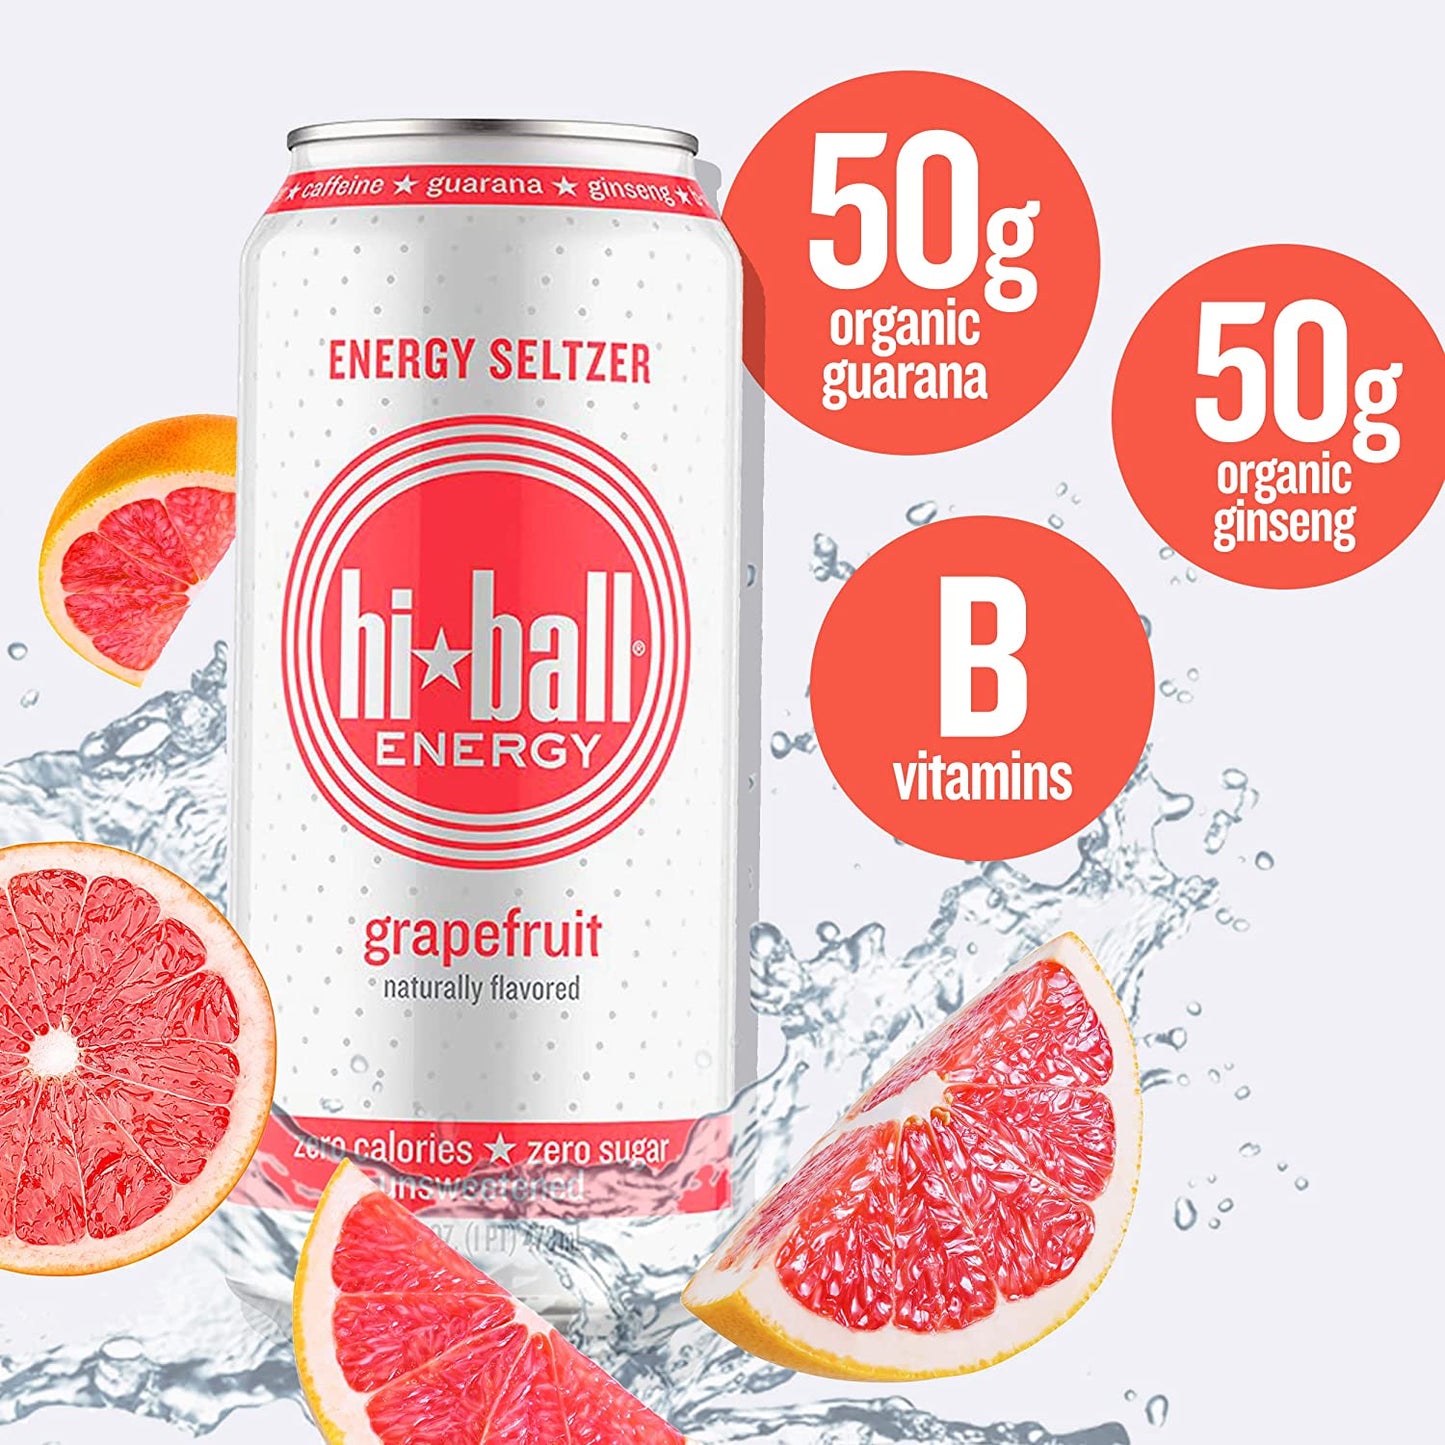 Hiball Energy Seltzer Water, Caffeinated Sparkling Water Made with Vitamin B12 and Vitamin B6, Sugar Free (4 pack of 12 Fl Oz), Grapefruit